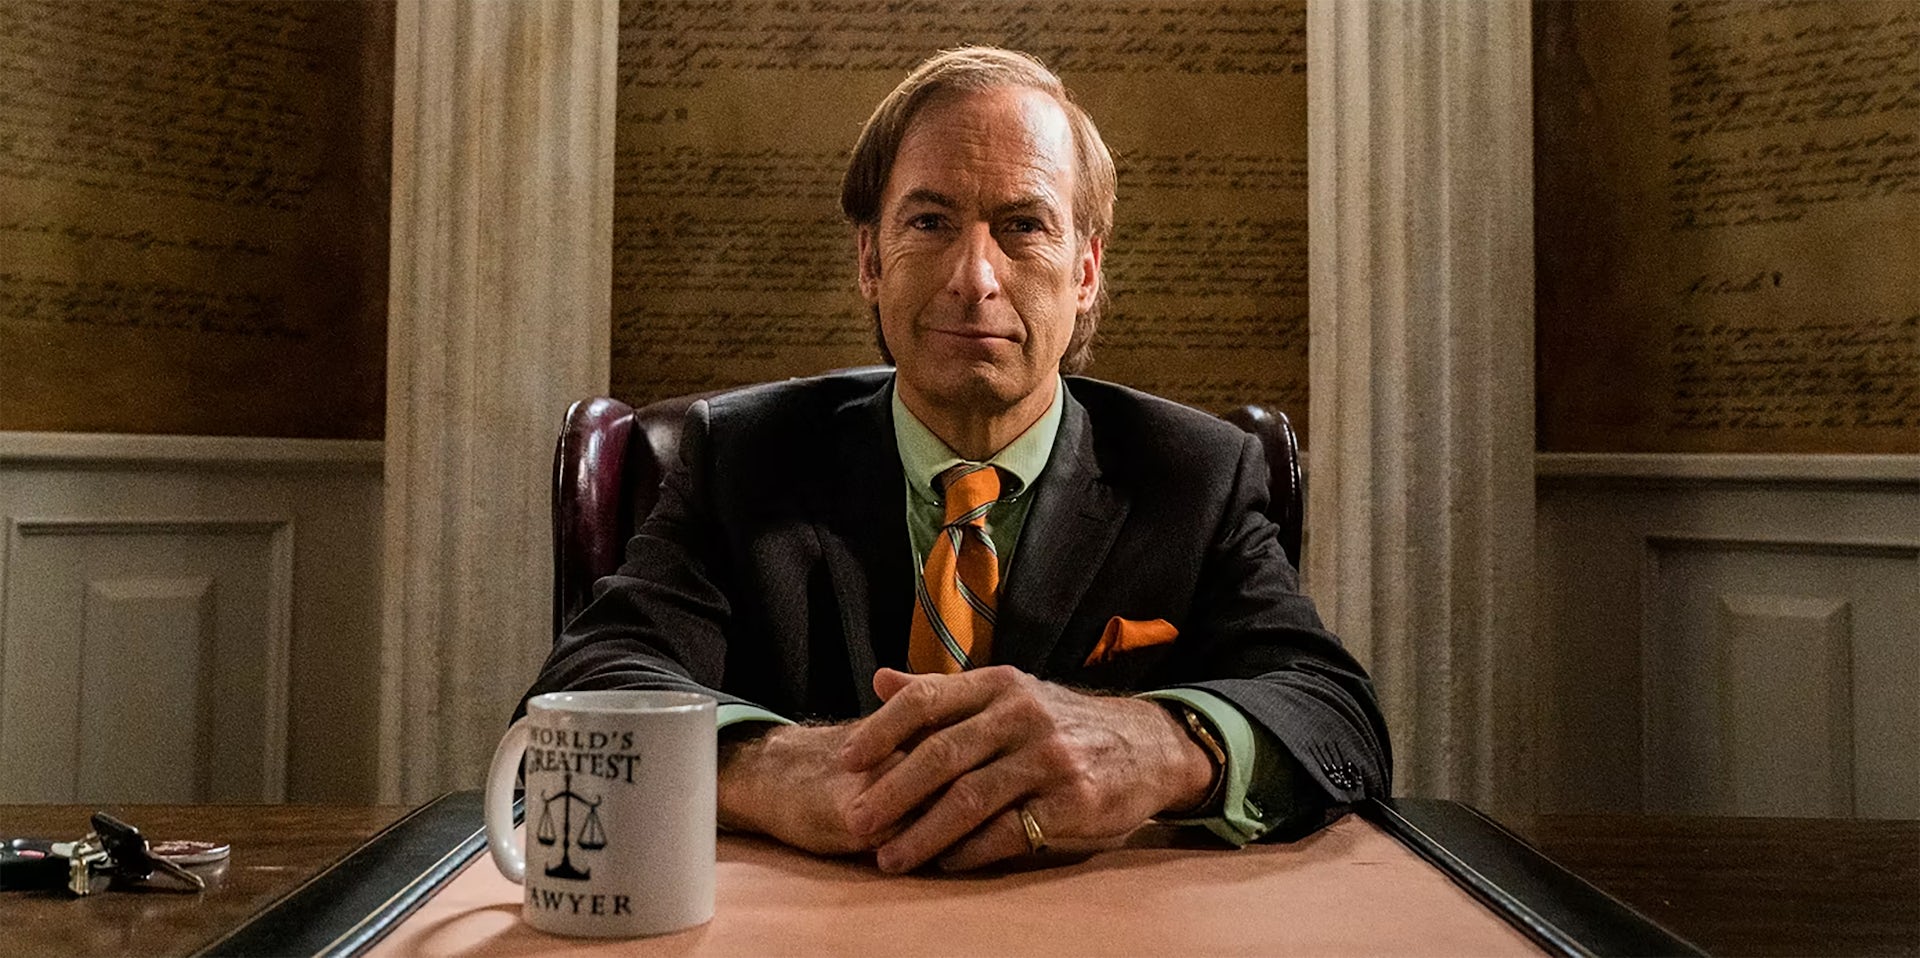 The finale of Better Call Saul: A psychologist explains how Jimmy